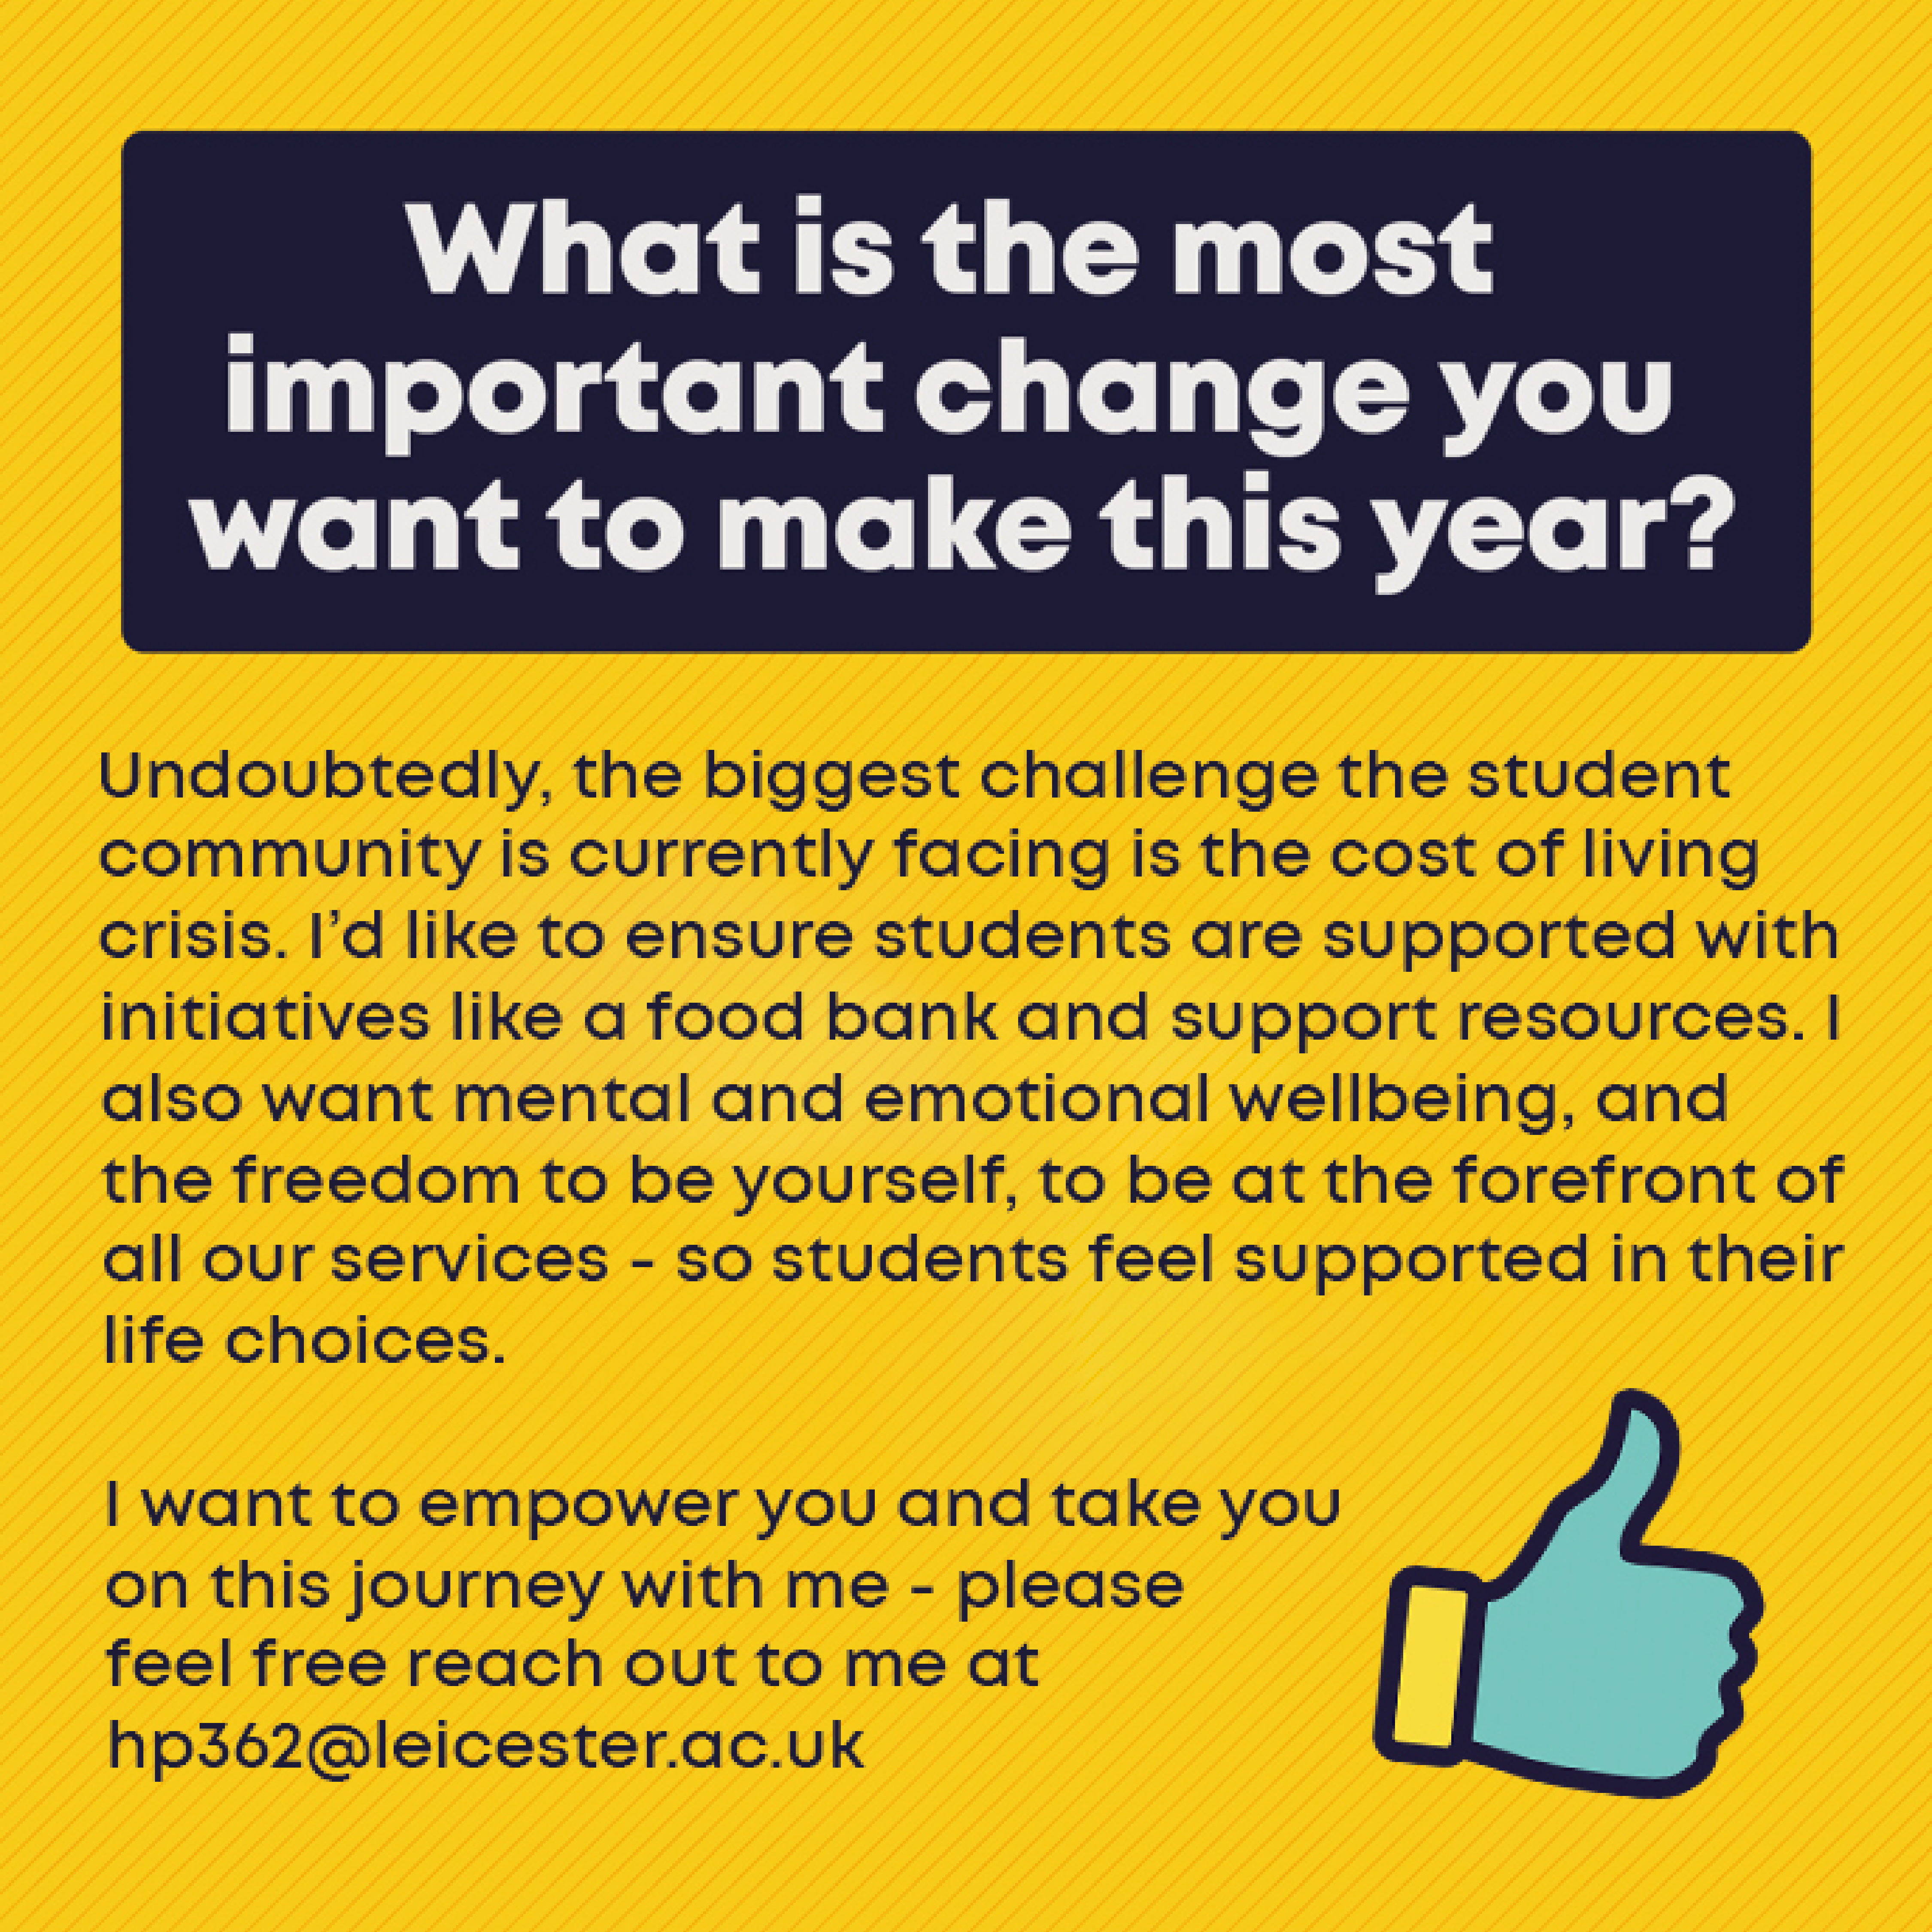 What is the most important change you want to make this year? Undoubtedly, the biggest challenge the student community is currently facing is the cost of living crisis. I’d like to ensure students are supported with initiatives like a food bank and support resources. I also want mental and emotional wellbeing, and the freedom to be yourself, to be at the forefront of all our services - so students feel supported in their life choices. I want to empower you and take you on this journey with me - please feel free reach out to me at hp362@leicester.ac.uk 